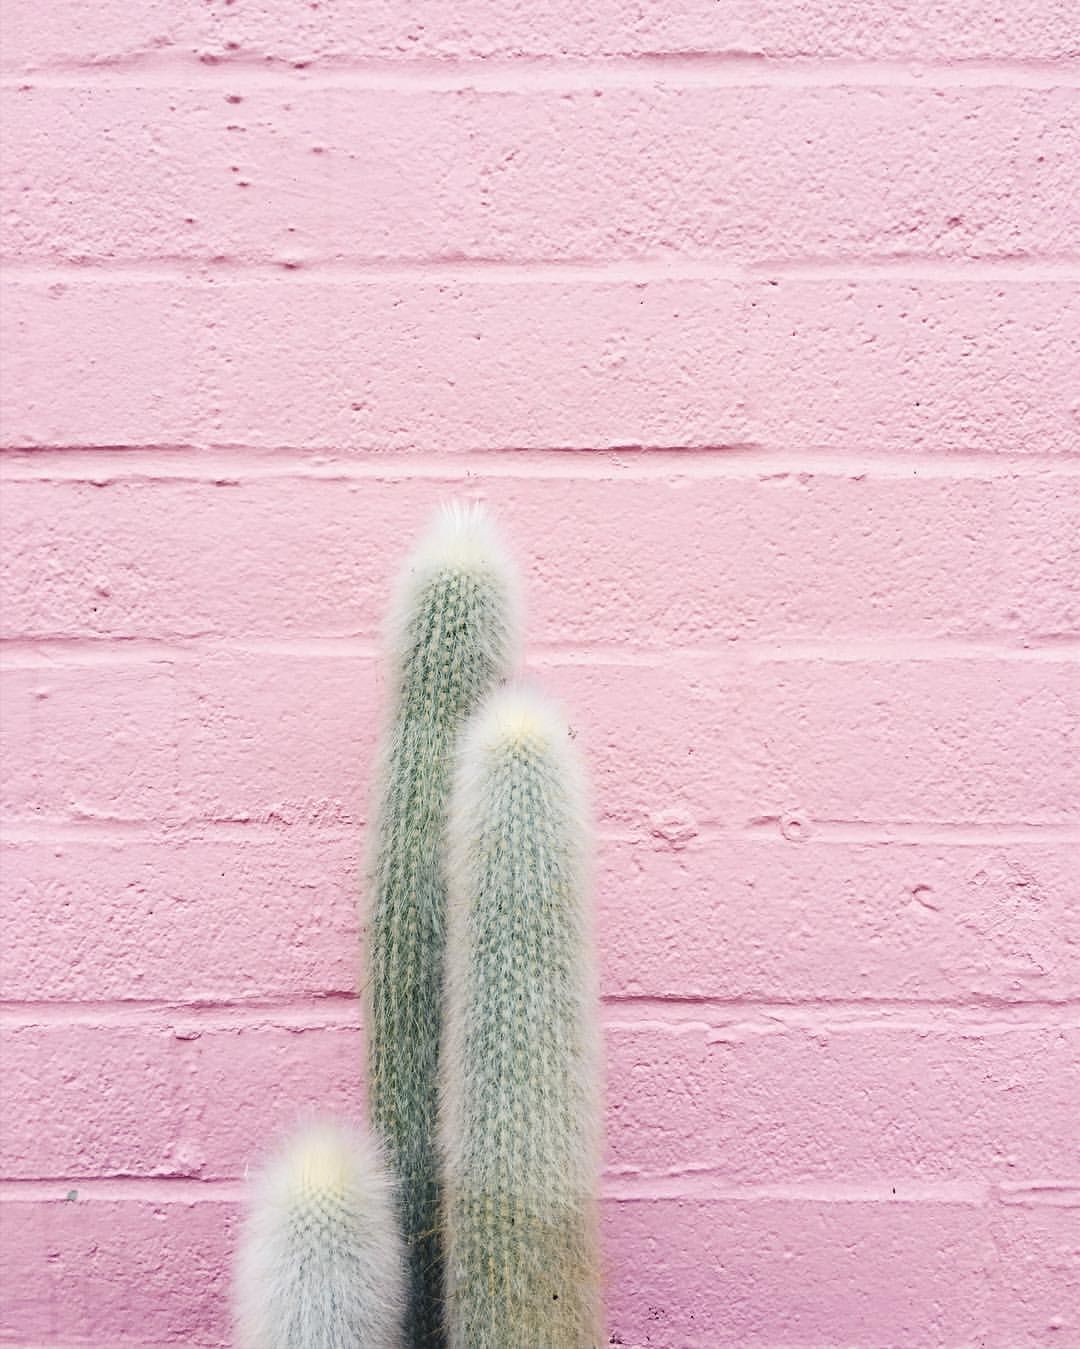 Is Millennial pink still the color of the moment? I hope so